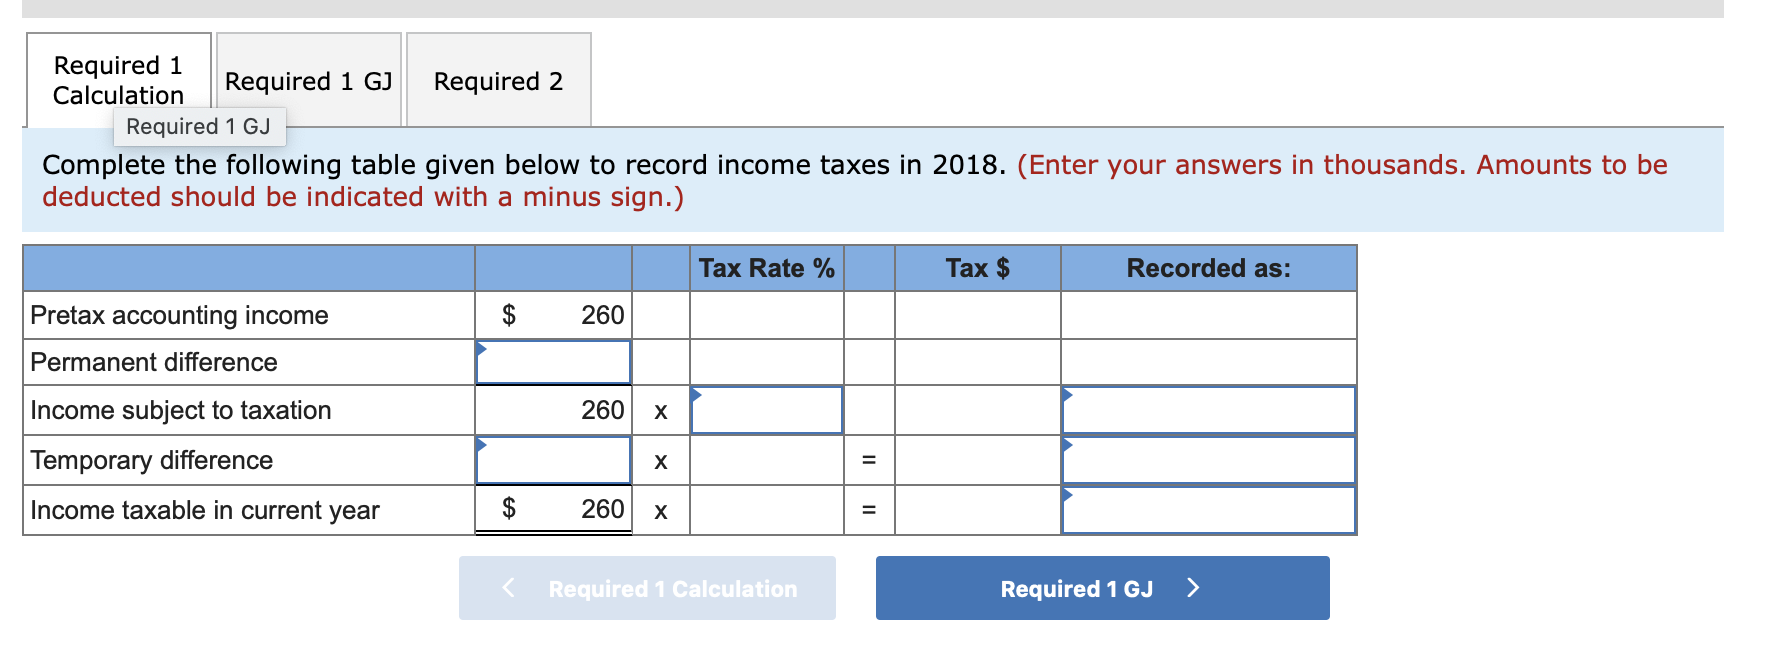 Required 1CalculationRequired 1 GJ Required 2.Required 1 GJComplete the following table given below to record income taxe